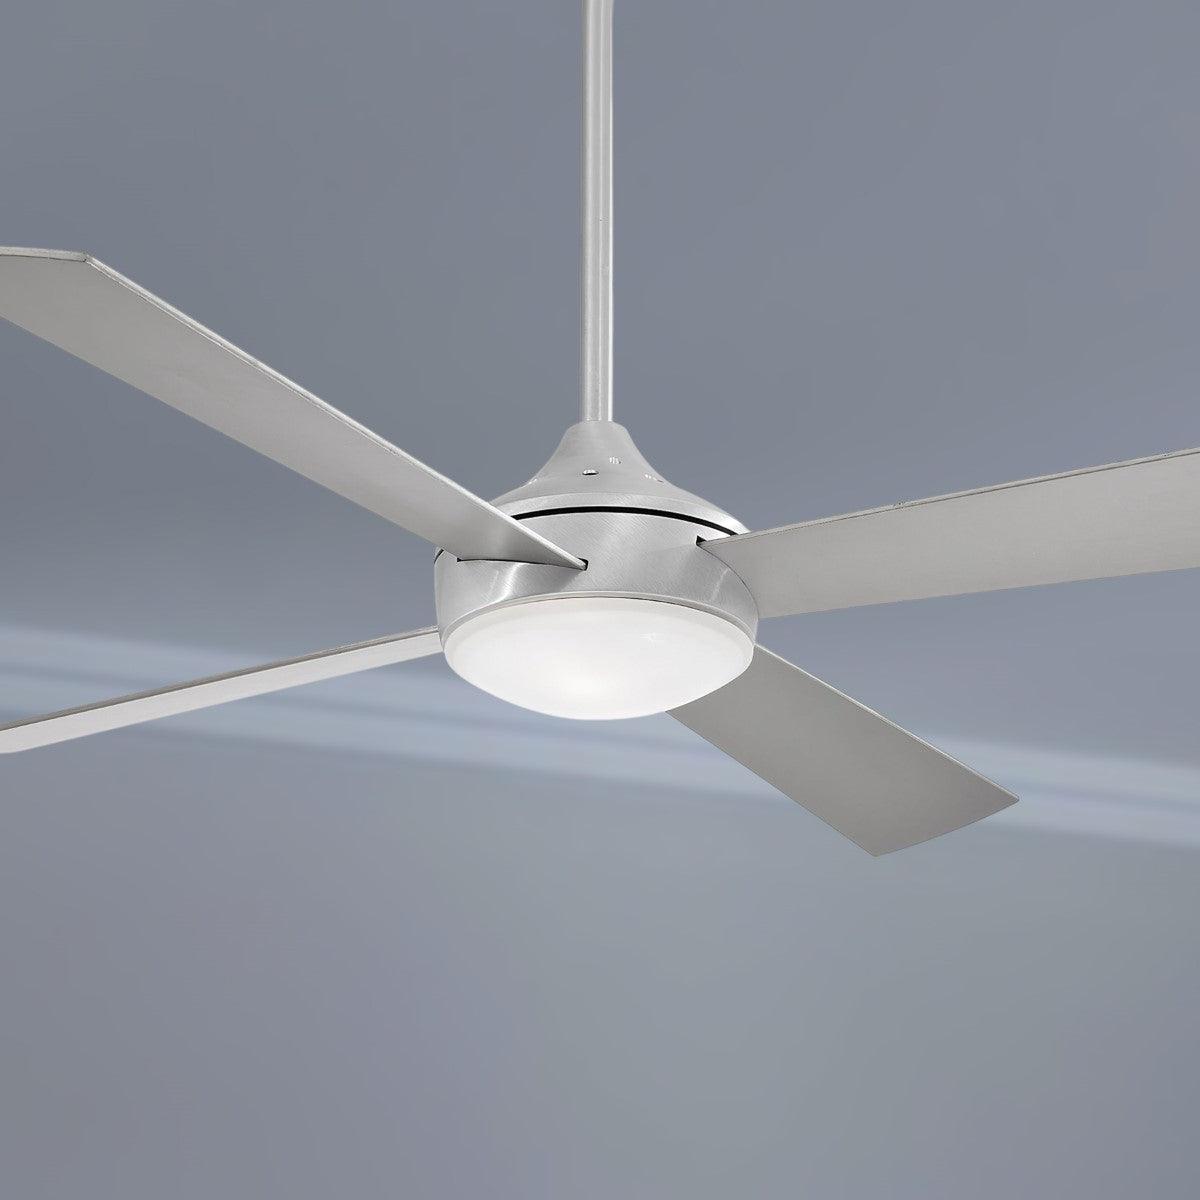 Aluma 52 Inch Modern Ceiling Fan With Light, Wall Control Included - Bees Lighting